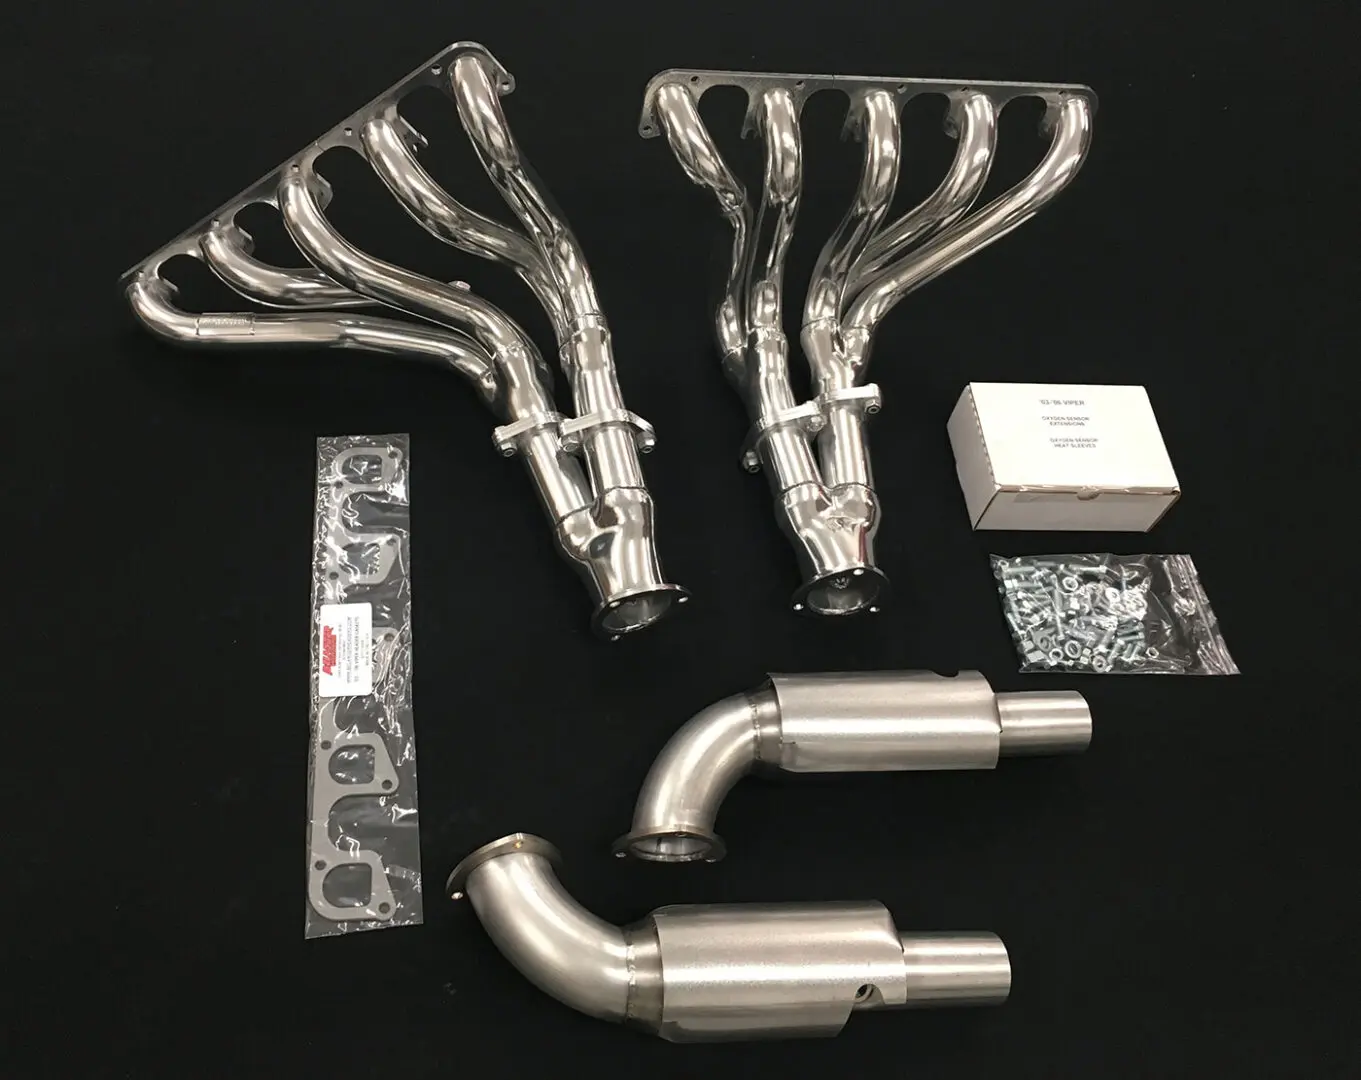 A set of exhaust pipes and accessories for a car.